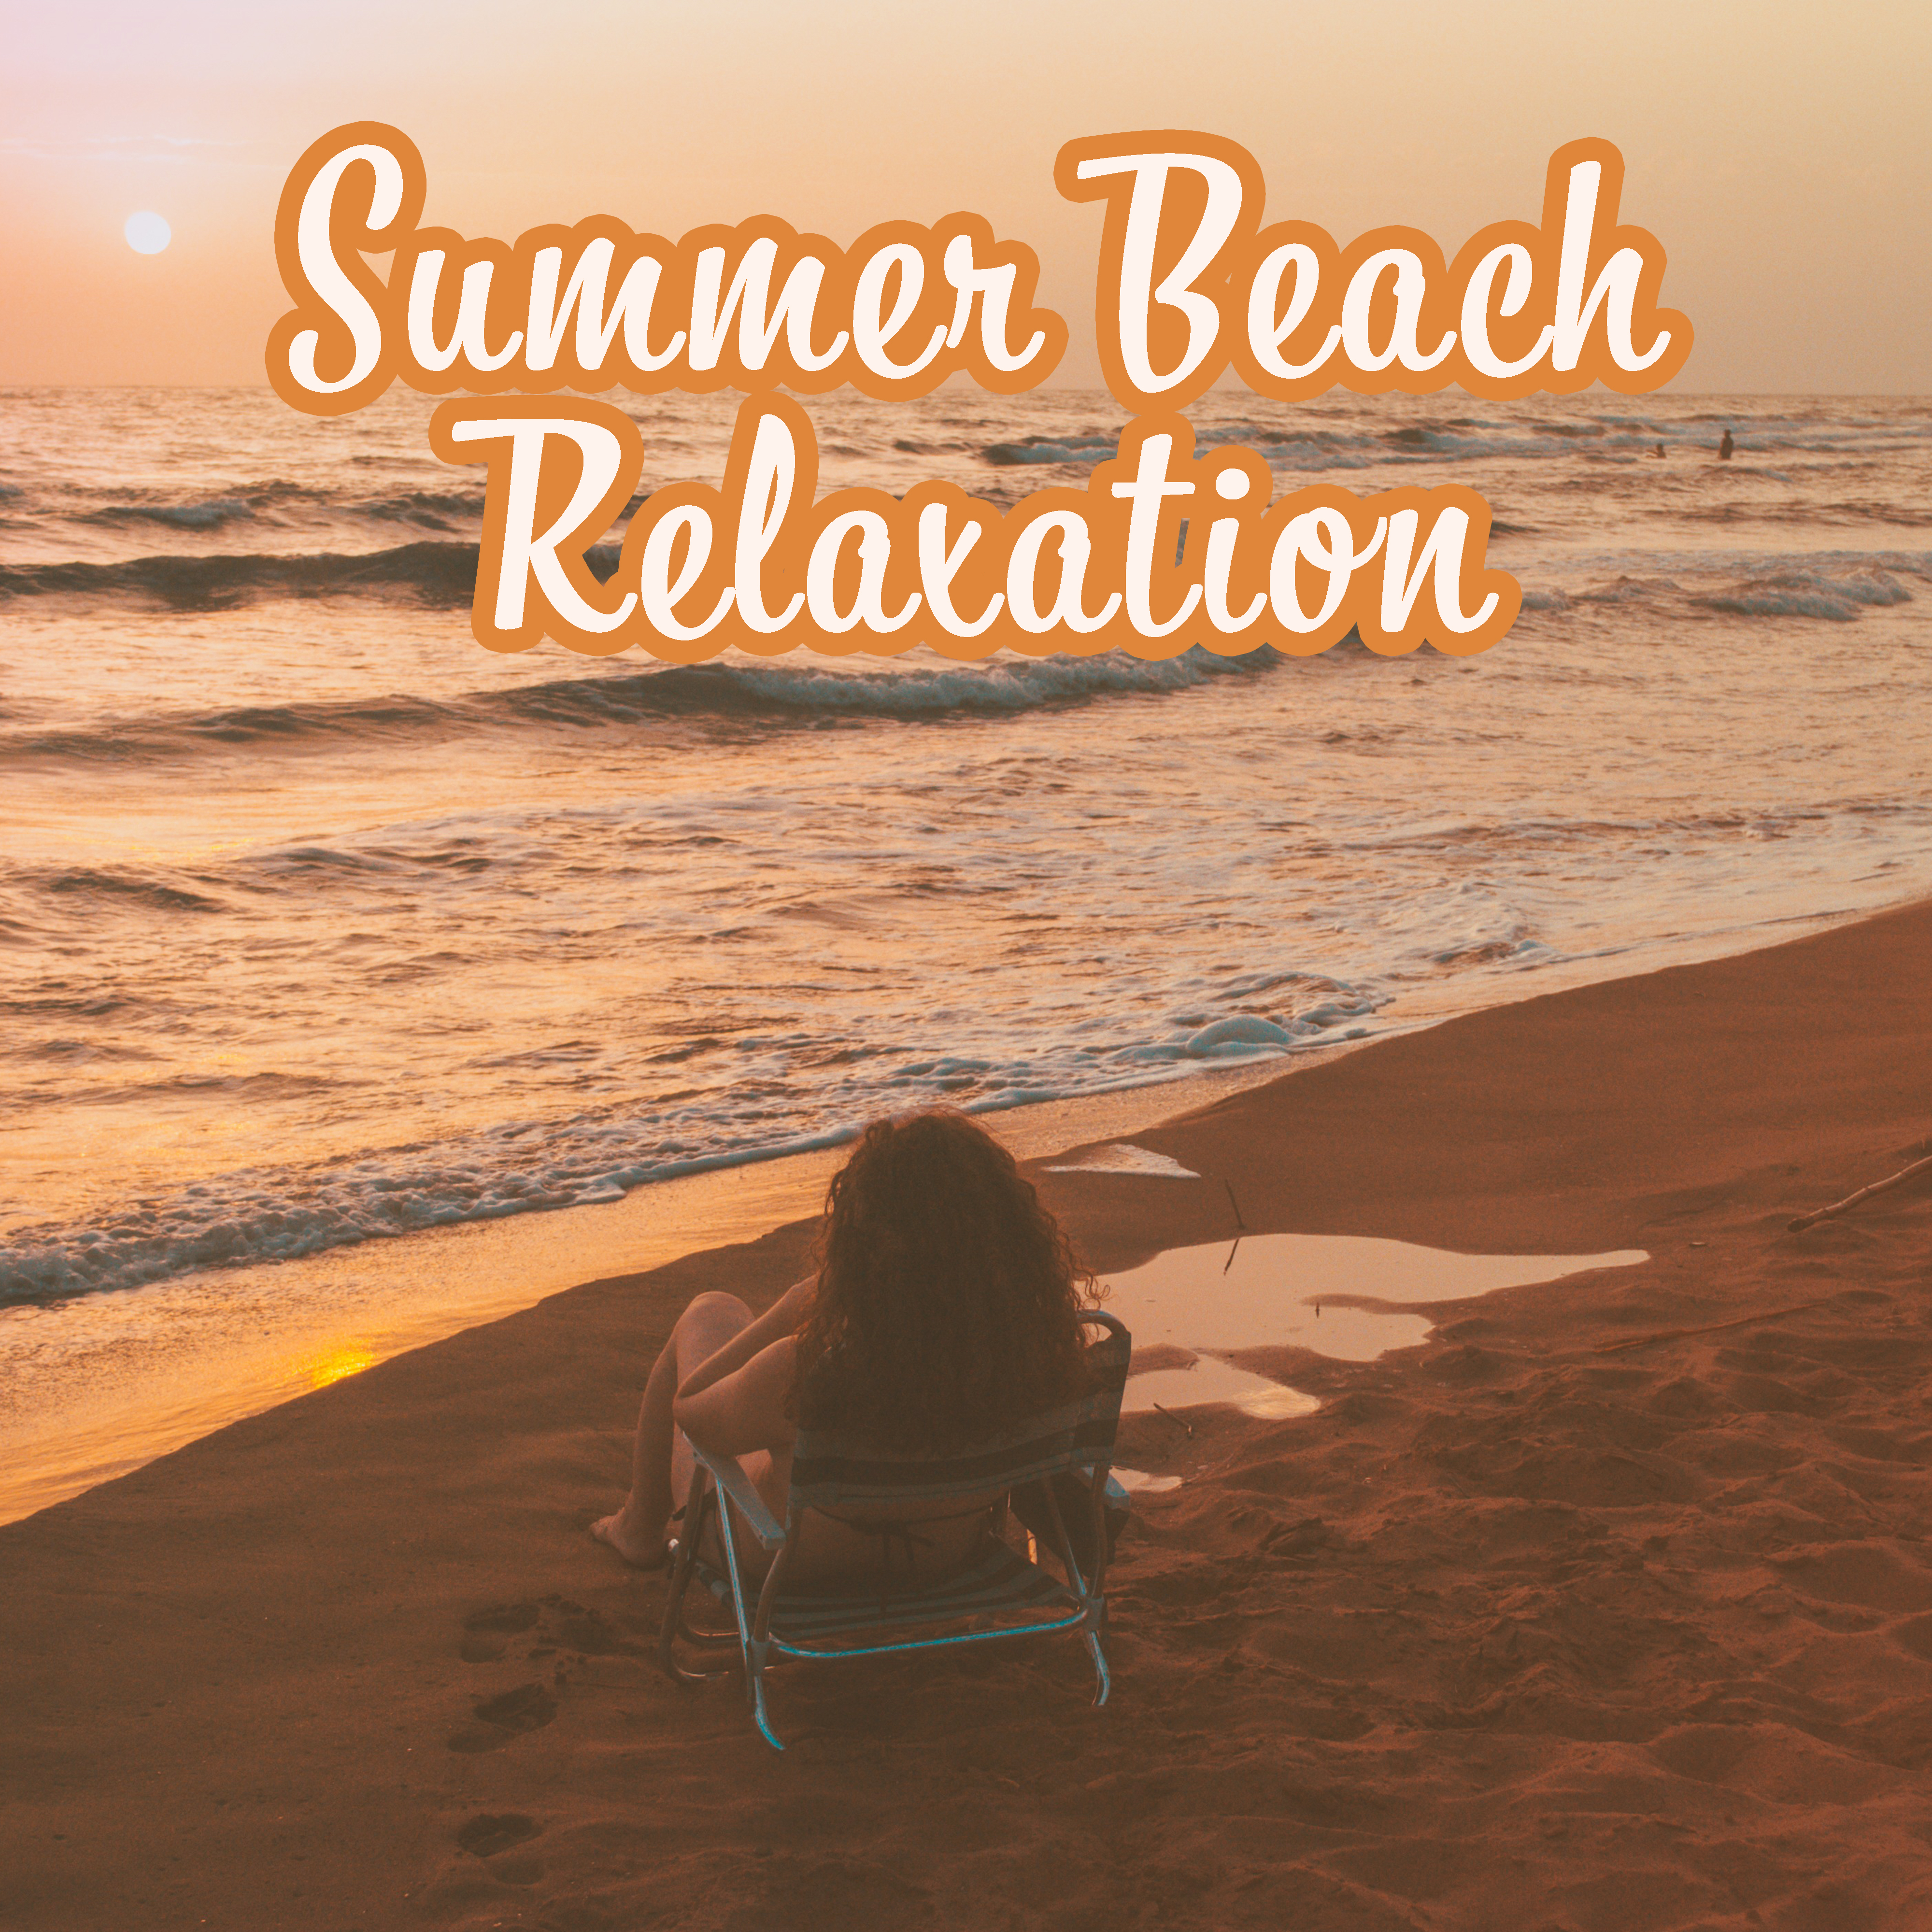 Summer Beach Relaxation  Easy Listening, Chill Out Beats, Ibiza Rest, Tropical Beach Lounge